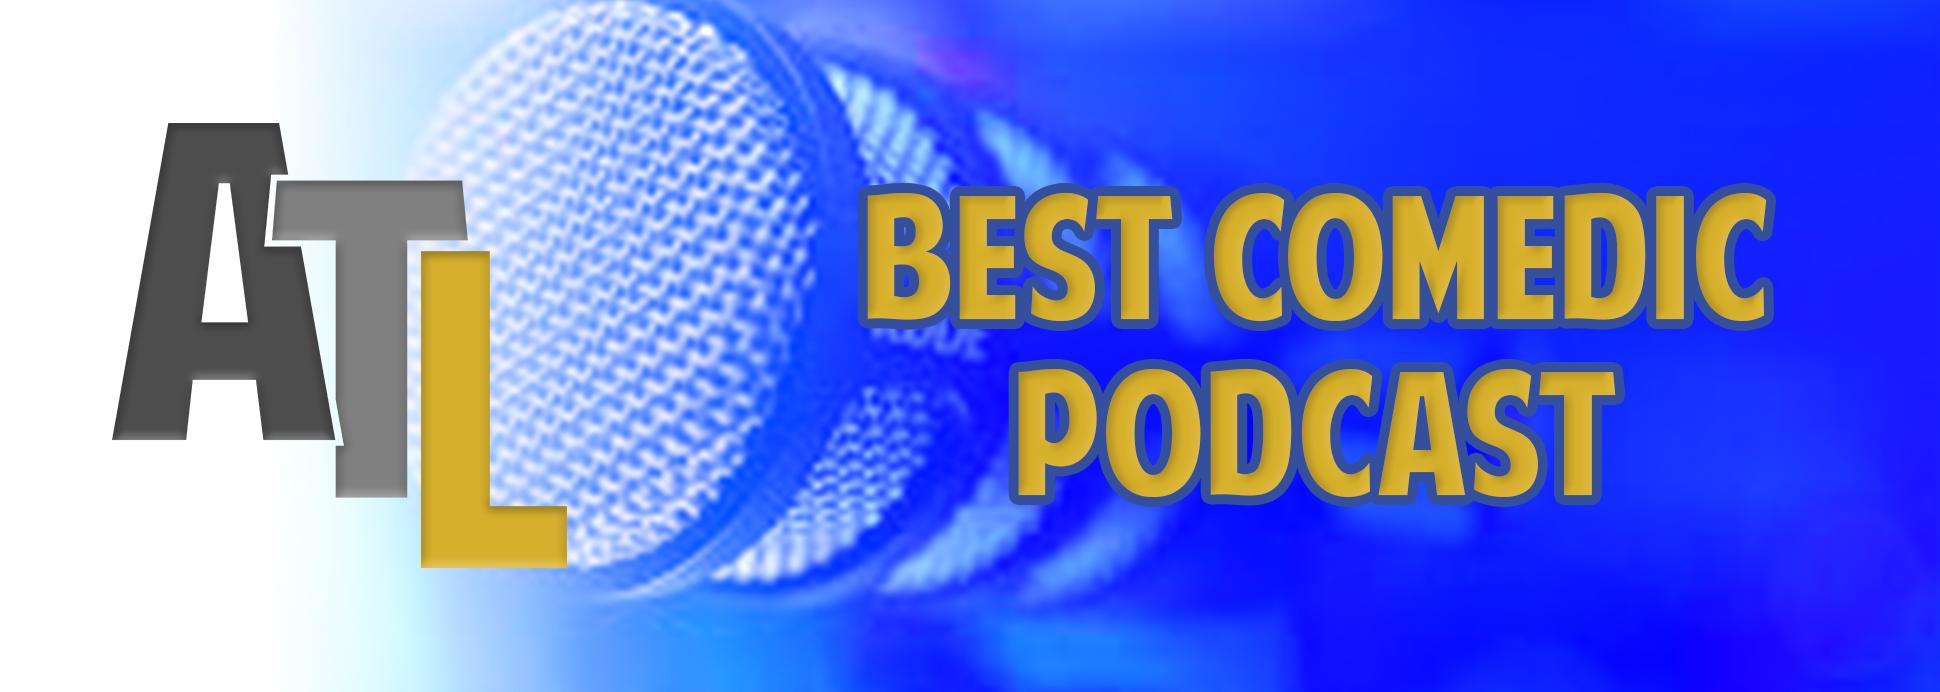 Best Comedic Podcast